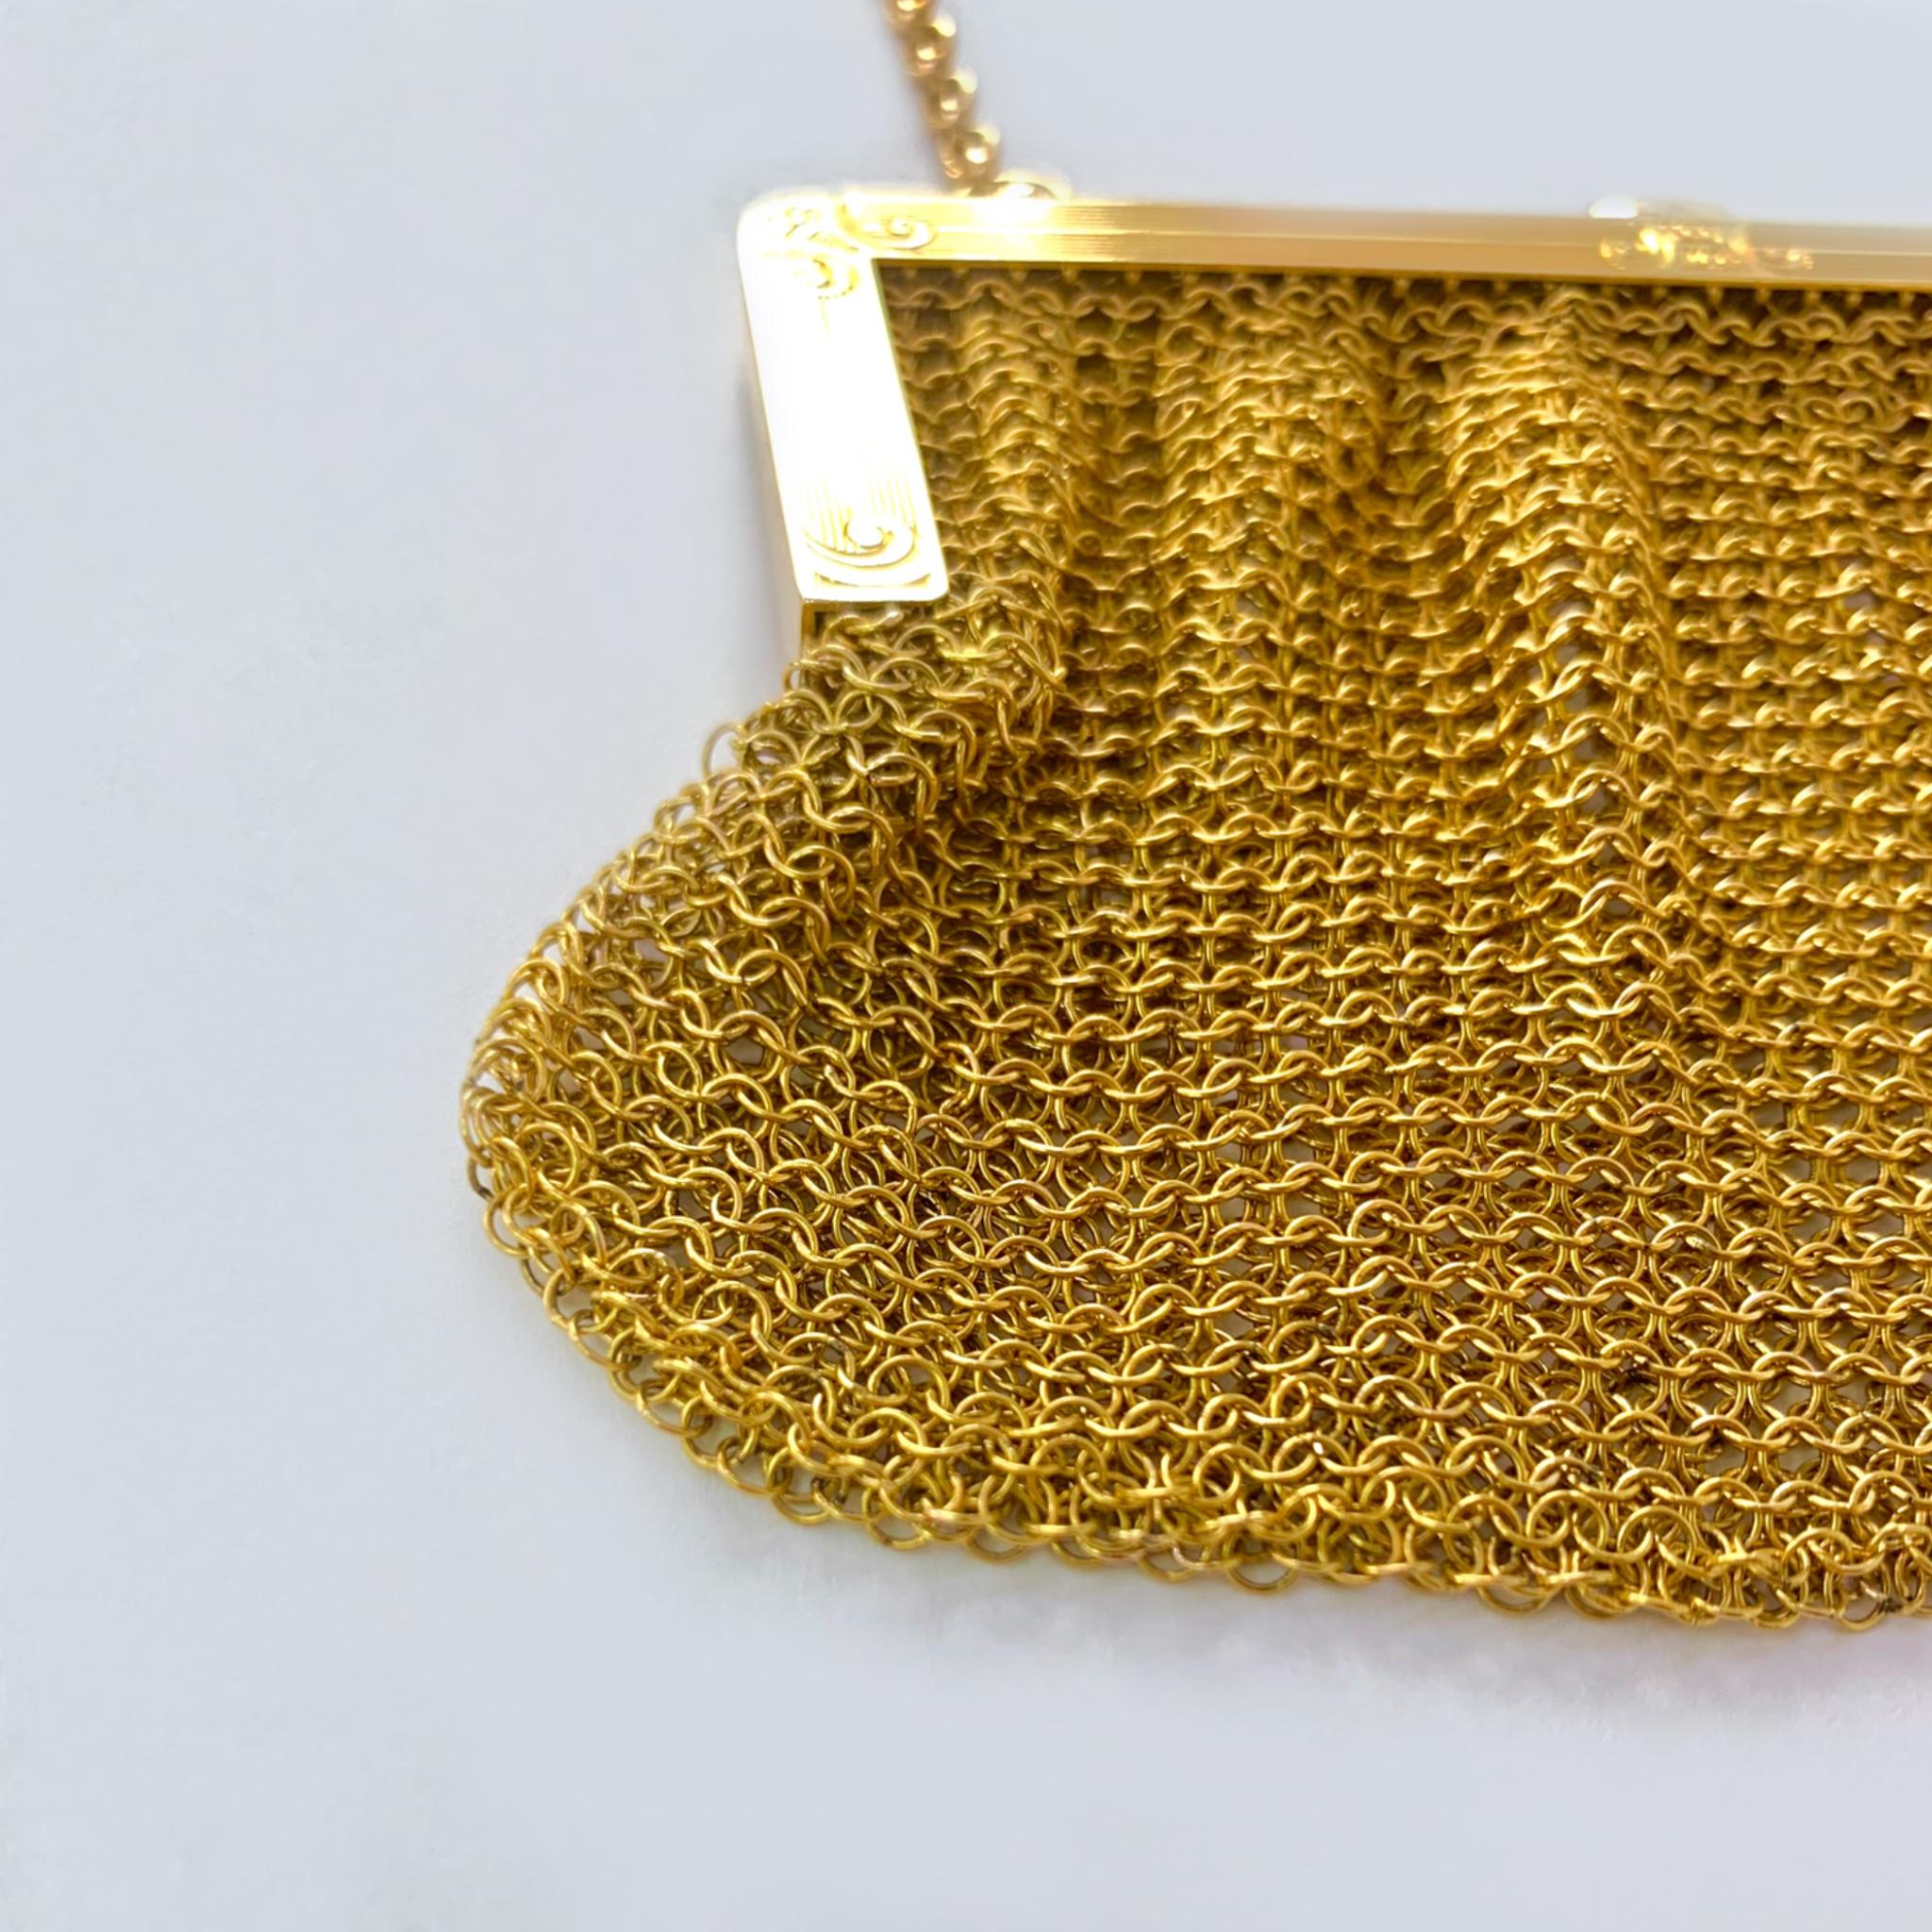 This beautiful antique, circa early 1900's, mesh 18 karat yellow gold purse is a charming piece of history. Hundreds of tiny gold links were hand woven together to make this masterpiece. It has a garnet push clasp and filigree designed opening,